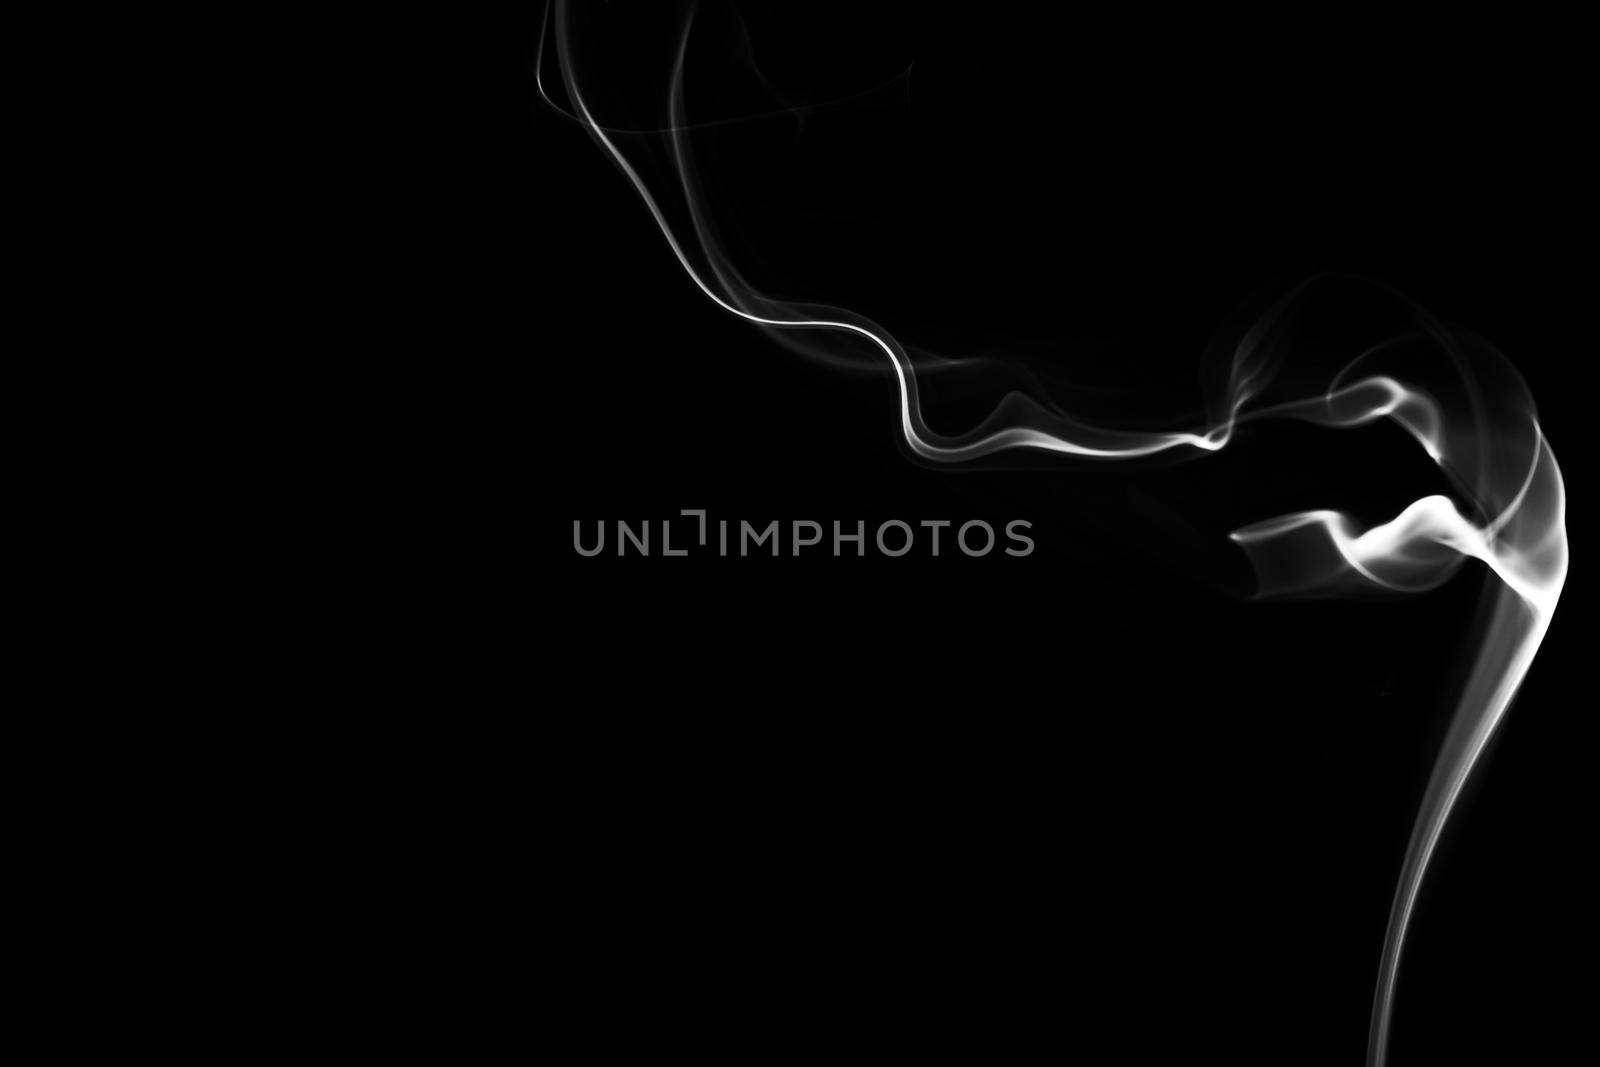 Abstract form of Smoke in black and white on a black background. Copy space